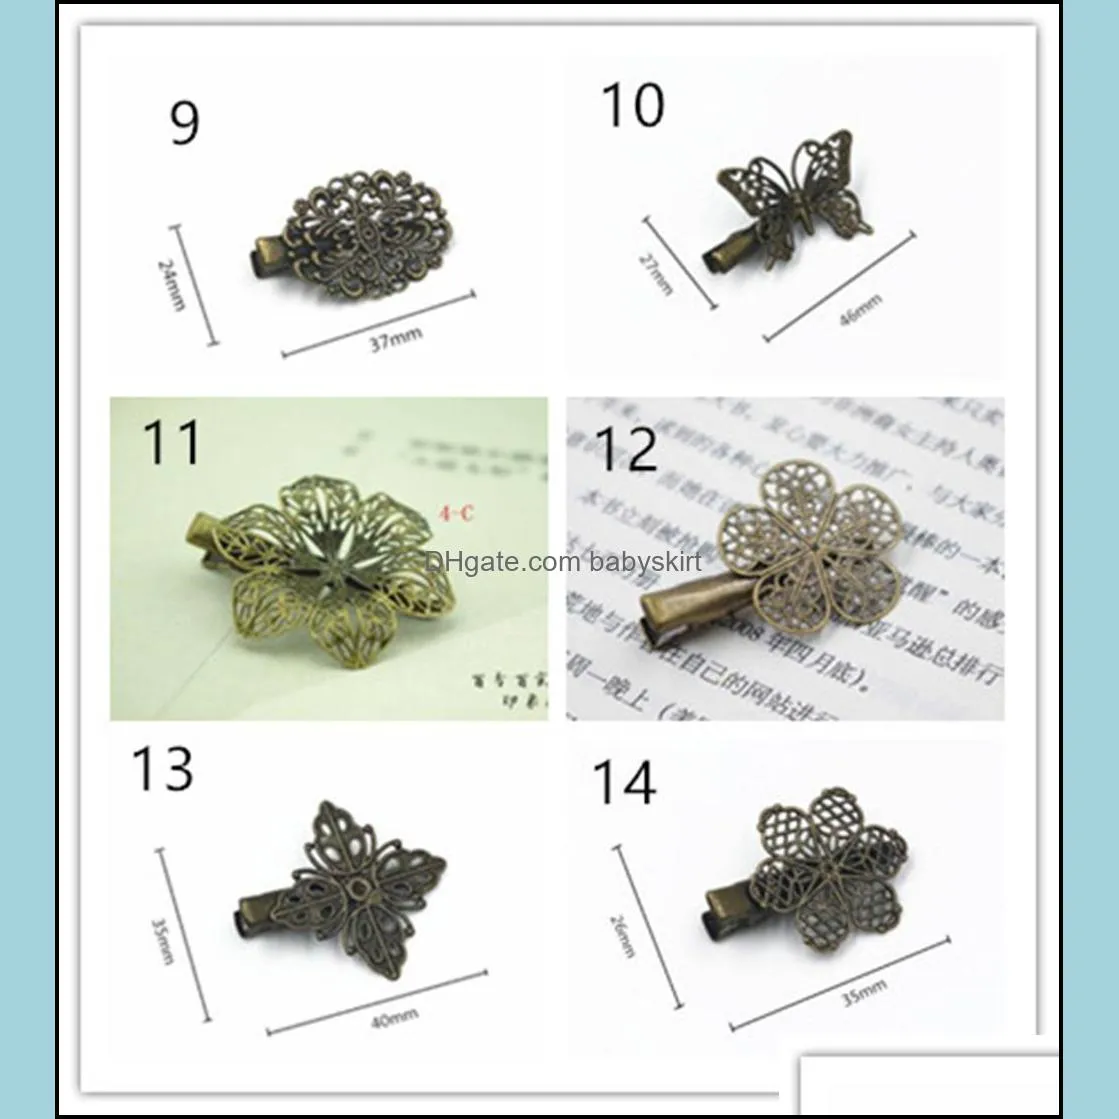 New Arrival Bronze Vintage Hair Clips 15 Styles Women Elegance Lady Hairpins Fashion Alloy Hair Clip hairpin Hair Accessories